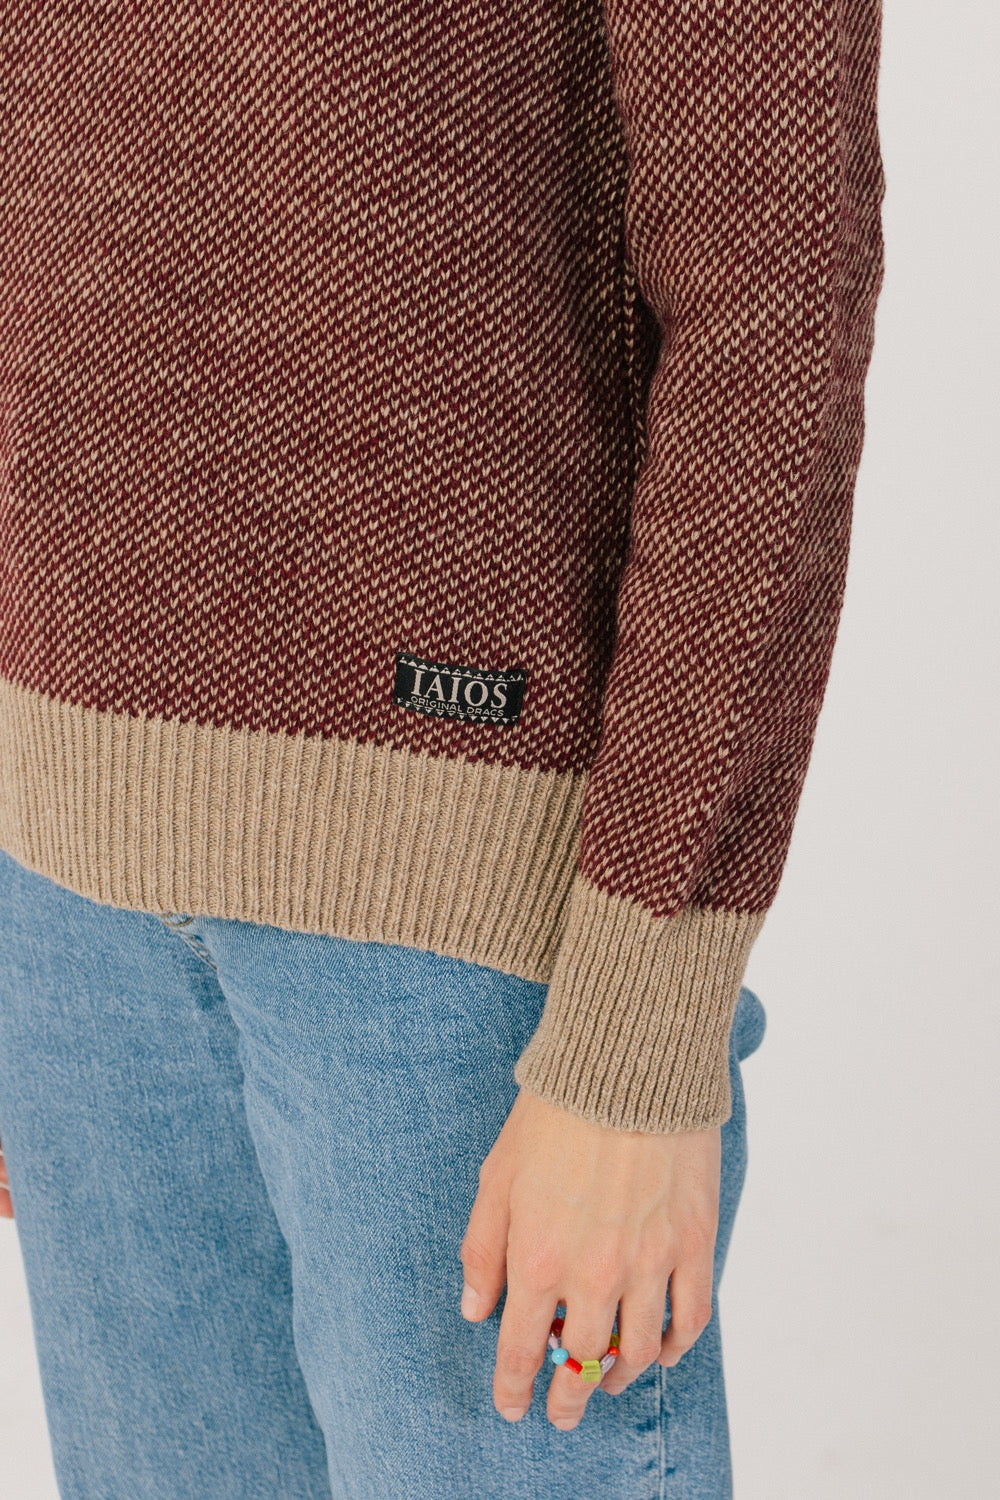 Detail of the bottom of the sweater where we can see the iaios label.